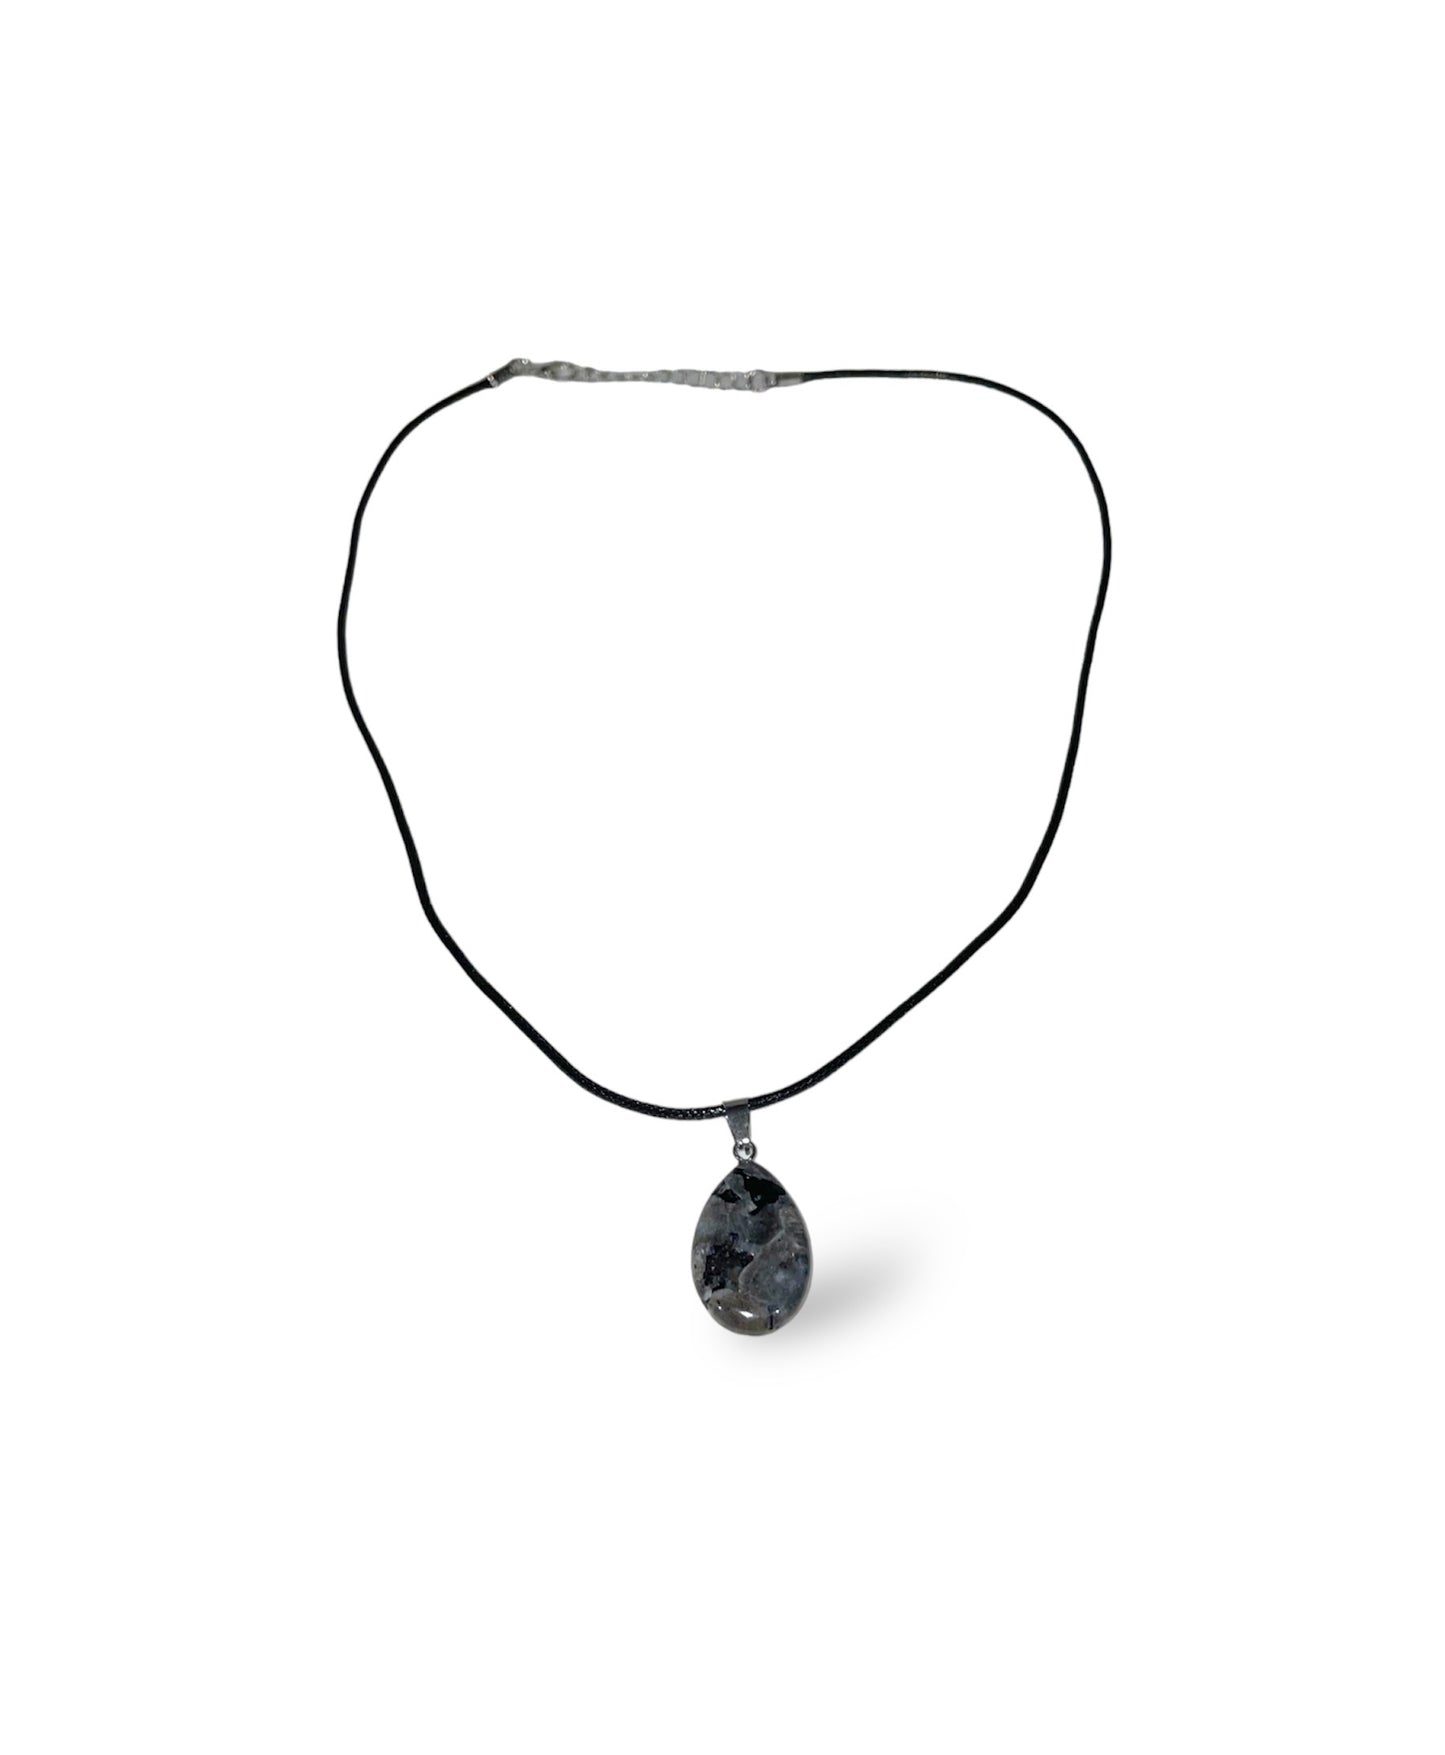 Black Cord Necklace with a Stone